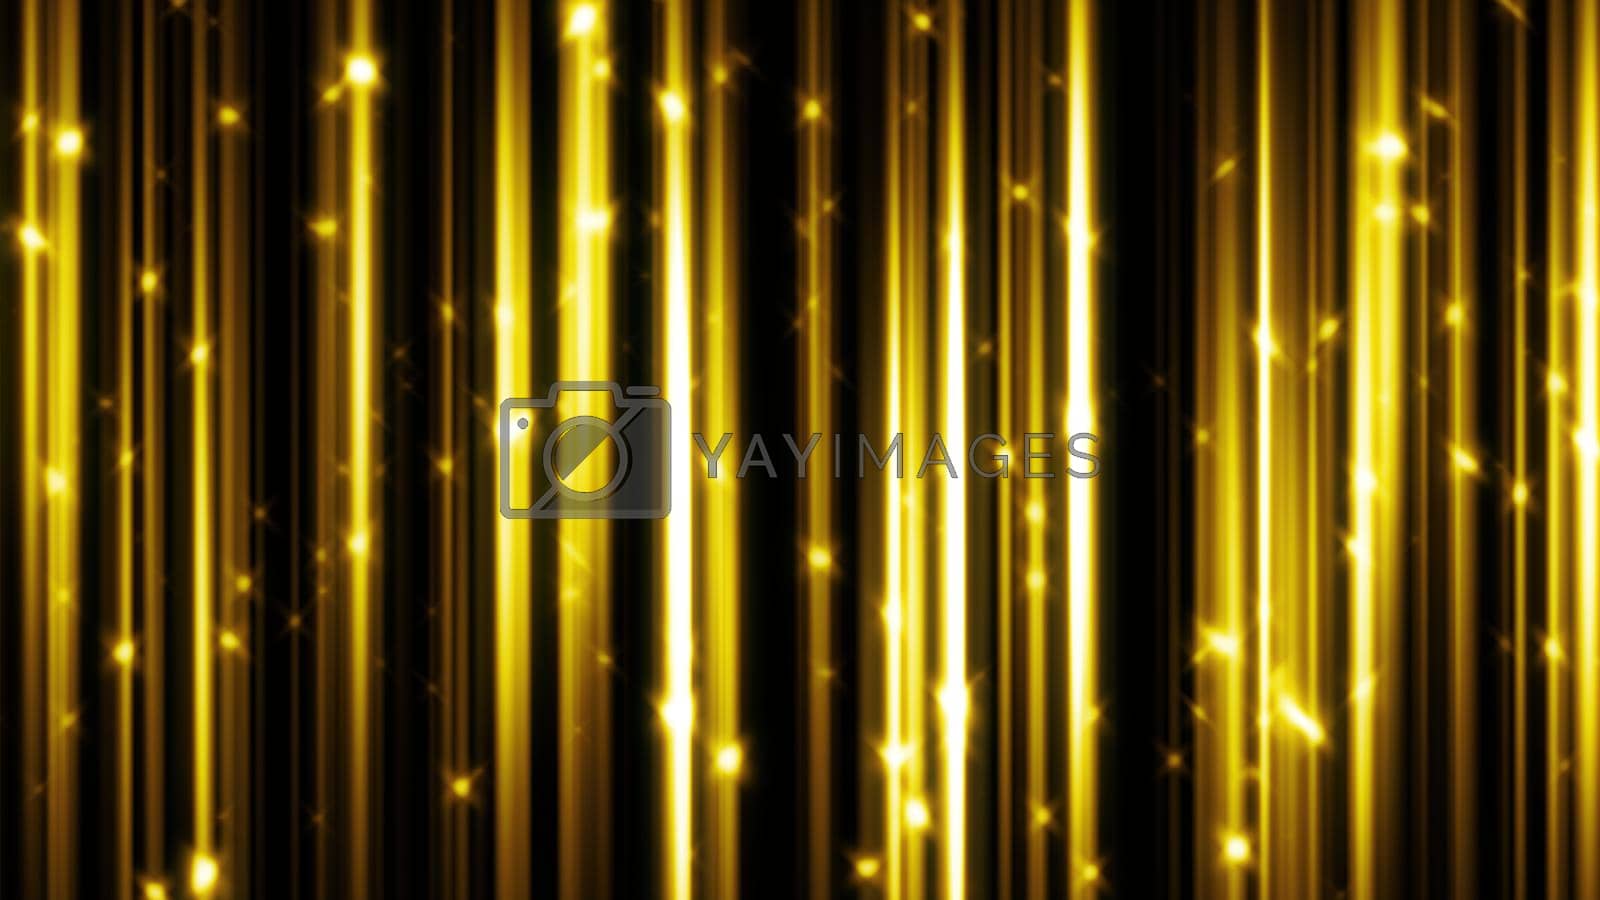 Golden abstract background. texture sparkles pattern